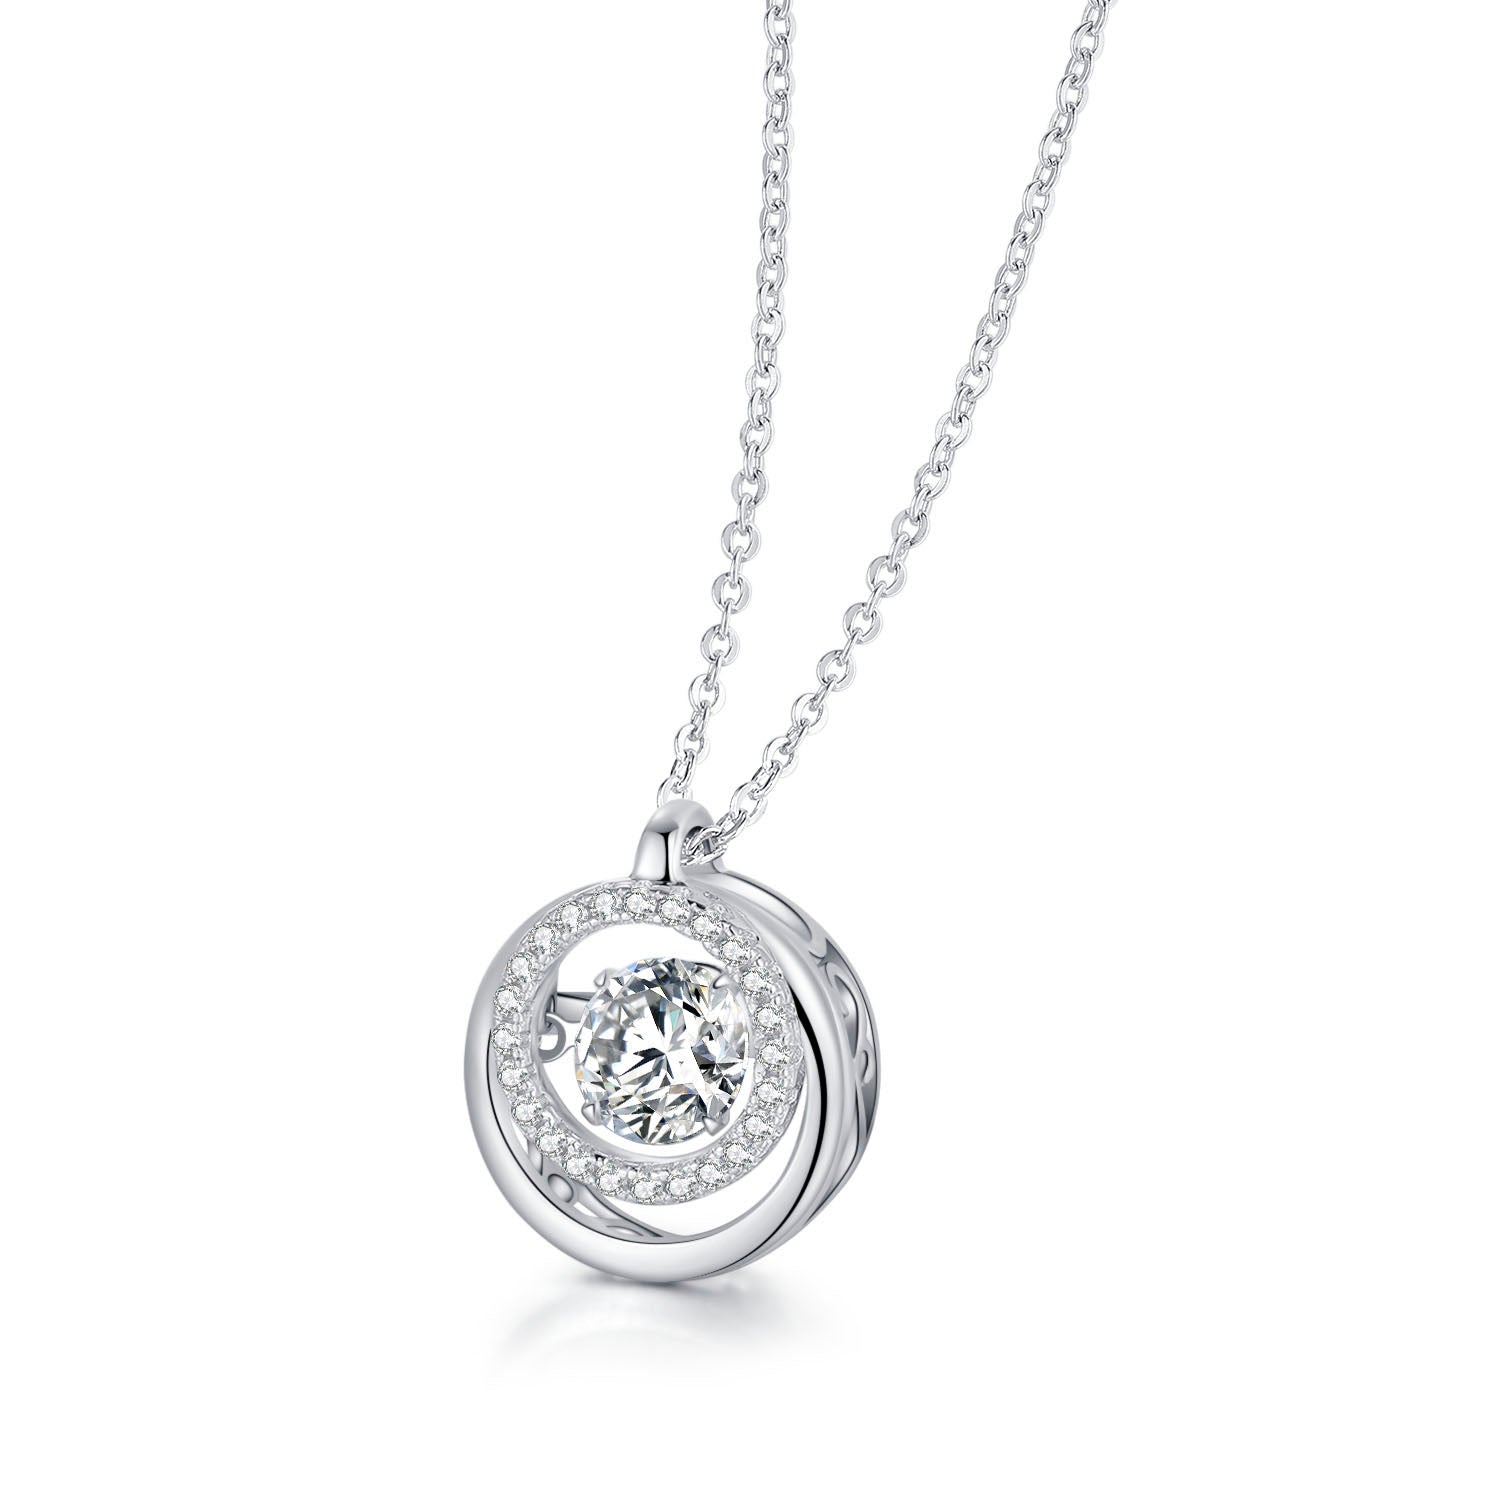 Creative round 925 sterling silver smart necklace